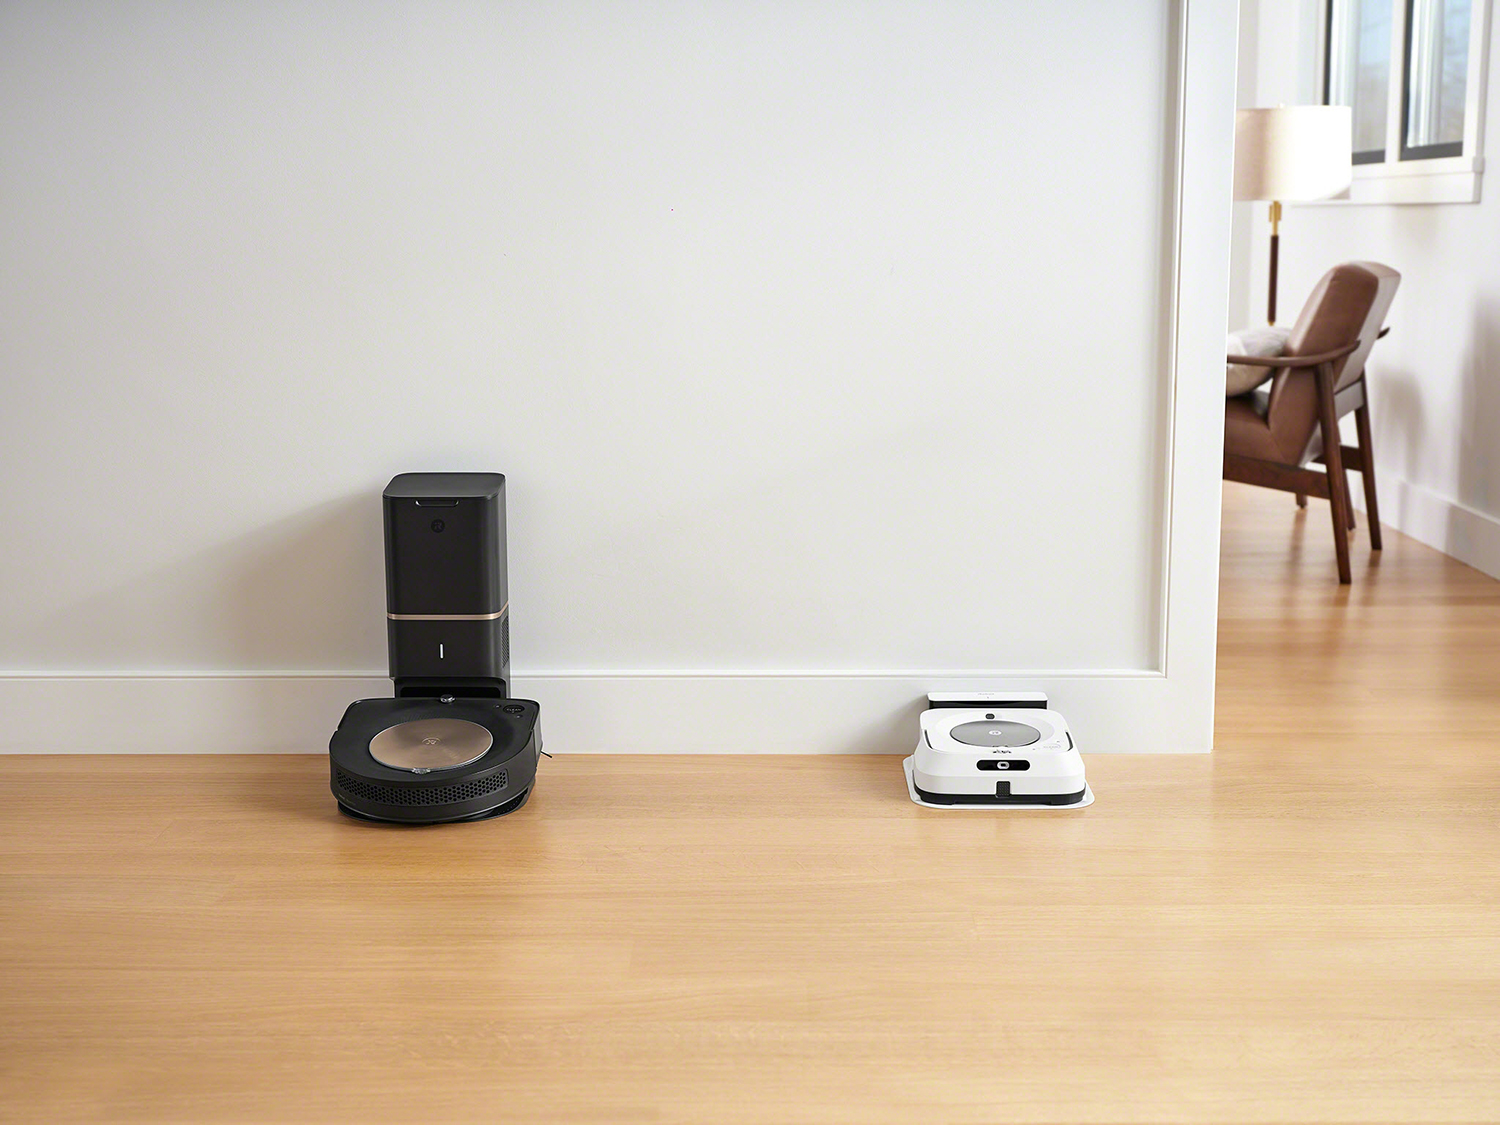 Lefant M571 Robot Vacuum and Mop: A Detailed Review of the Design